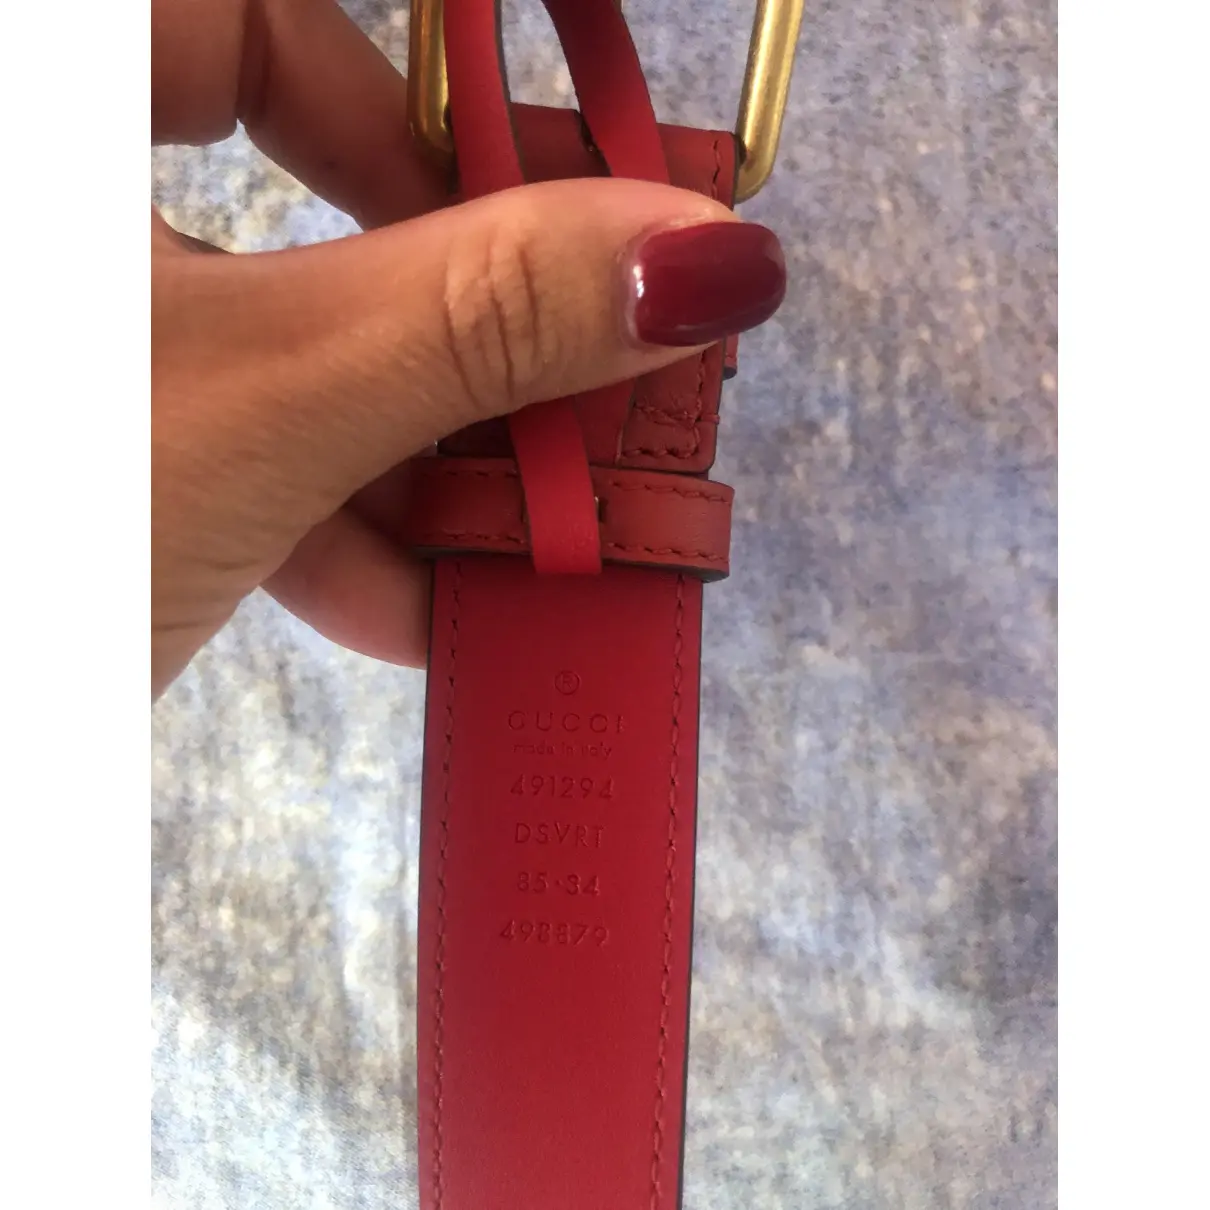 Marmont leather clutch bag Gucci